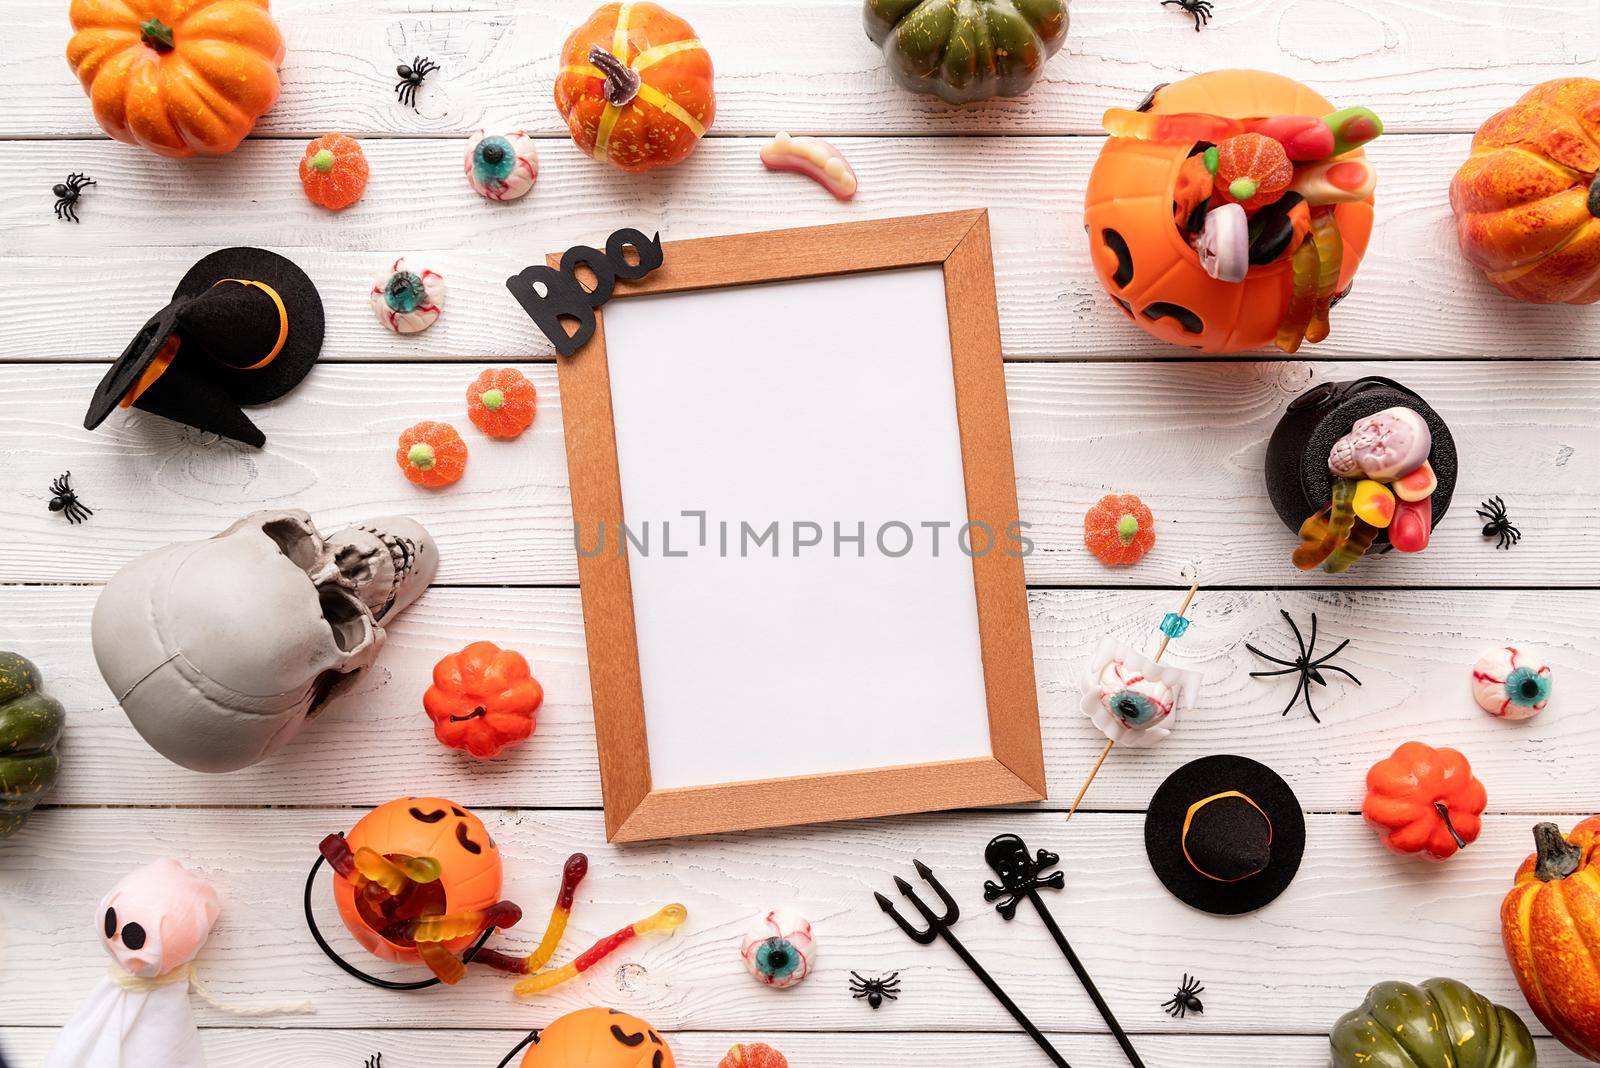 Halloween concept. Blank frame mock up design with halloween decorations and sweets